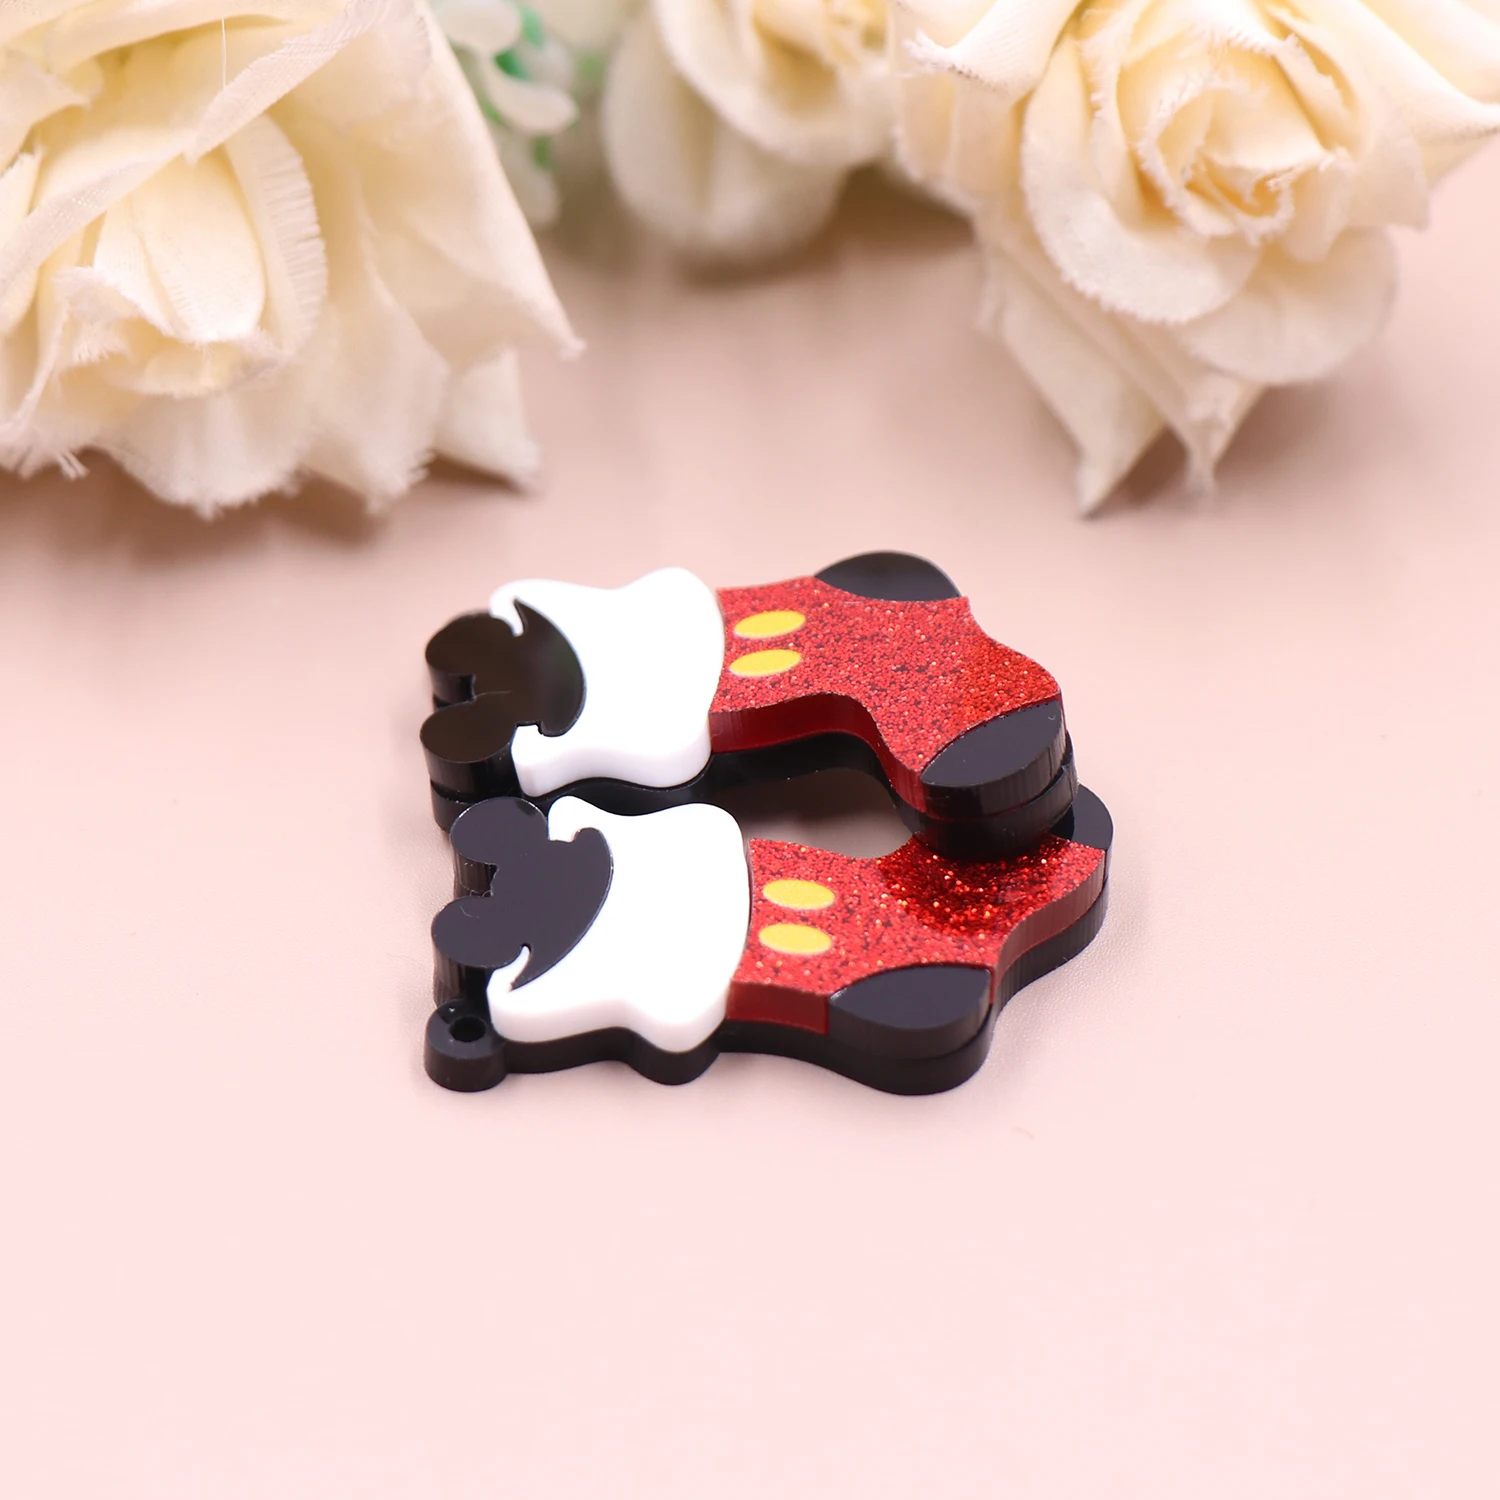 1 pair 38mm New product CN mouse Socks For earring acrylic women's cute jewelry accessories images - 6